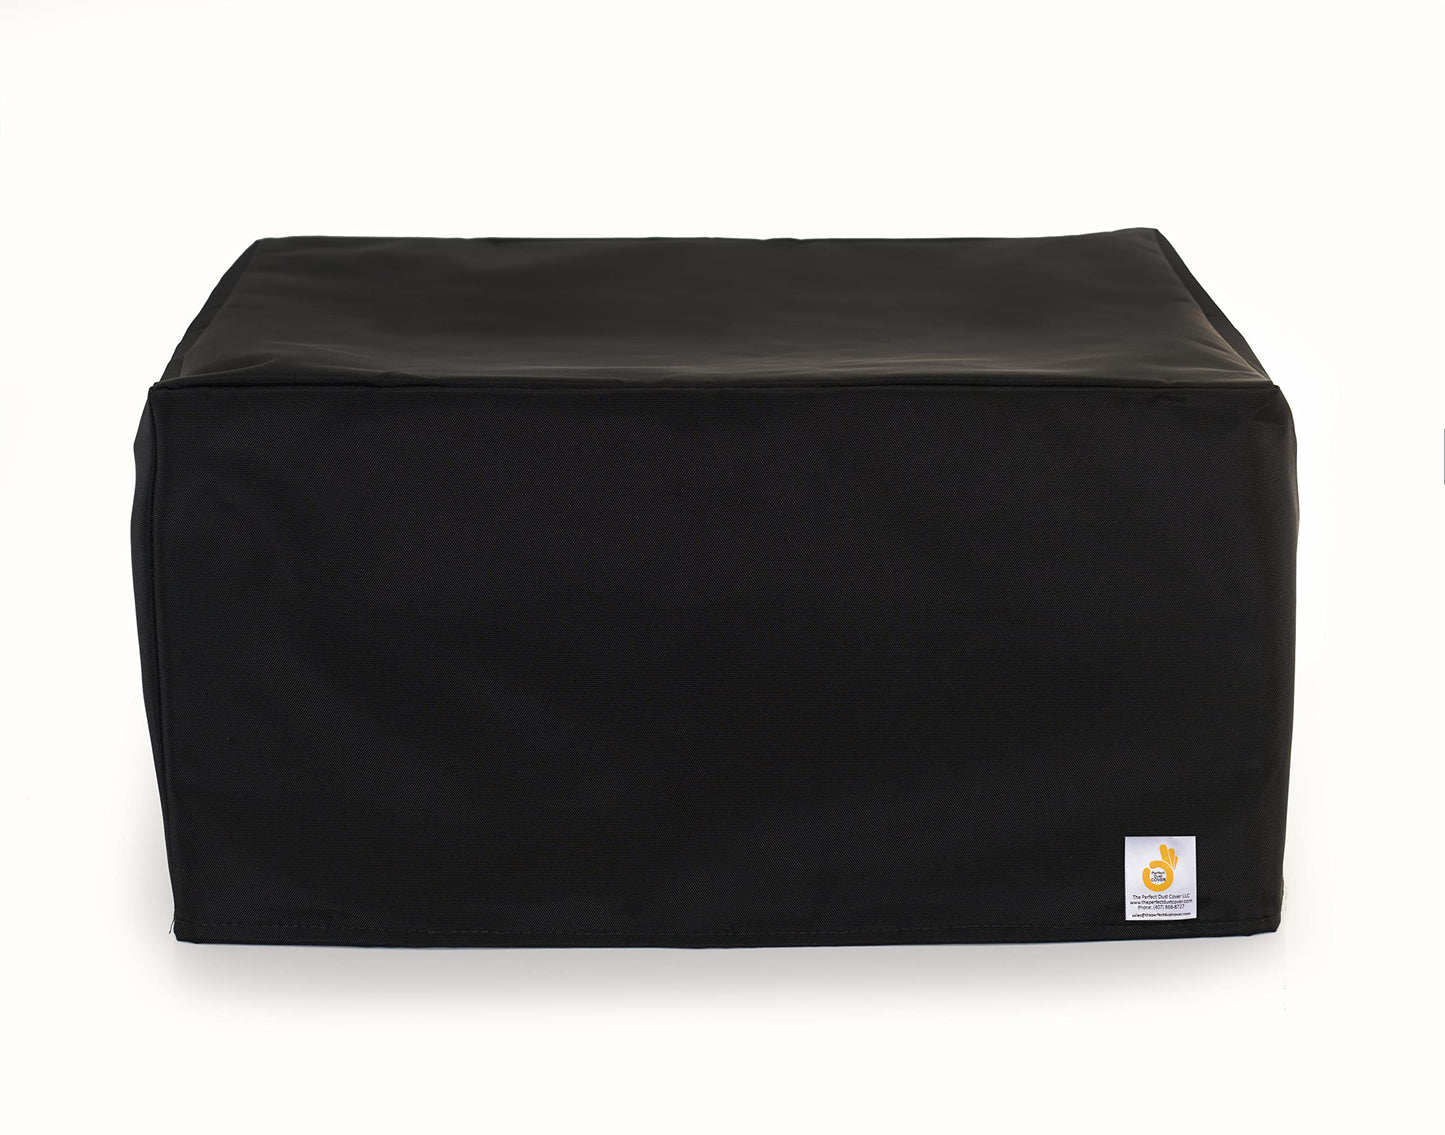 The Perfect Dust Cover, Black Nylon Cover Compatible with HP Deskjet 2855e Wireless Printer, Anti Static, Double Stitched and Waterproof Dust Cover Dimensions 16.7''W x 11.97''D x 6.1''H by Perfect Dust Cover LLC